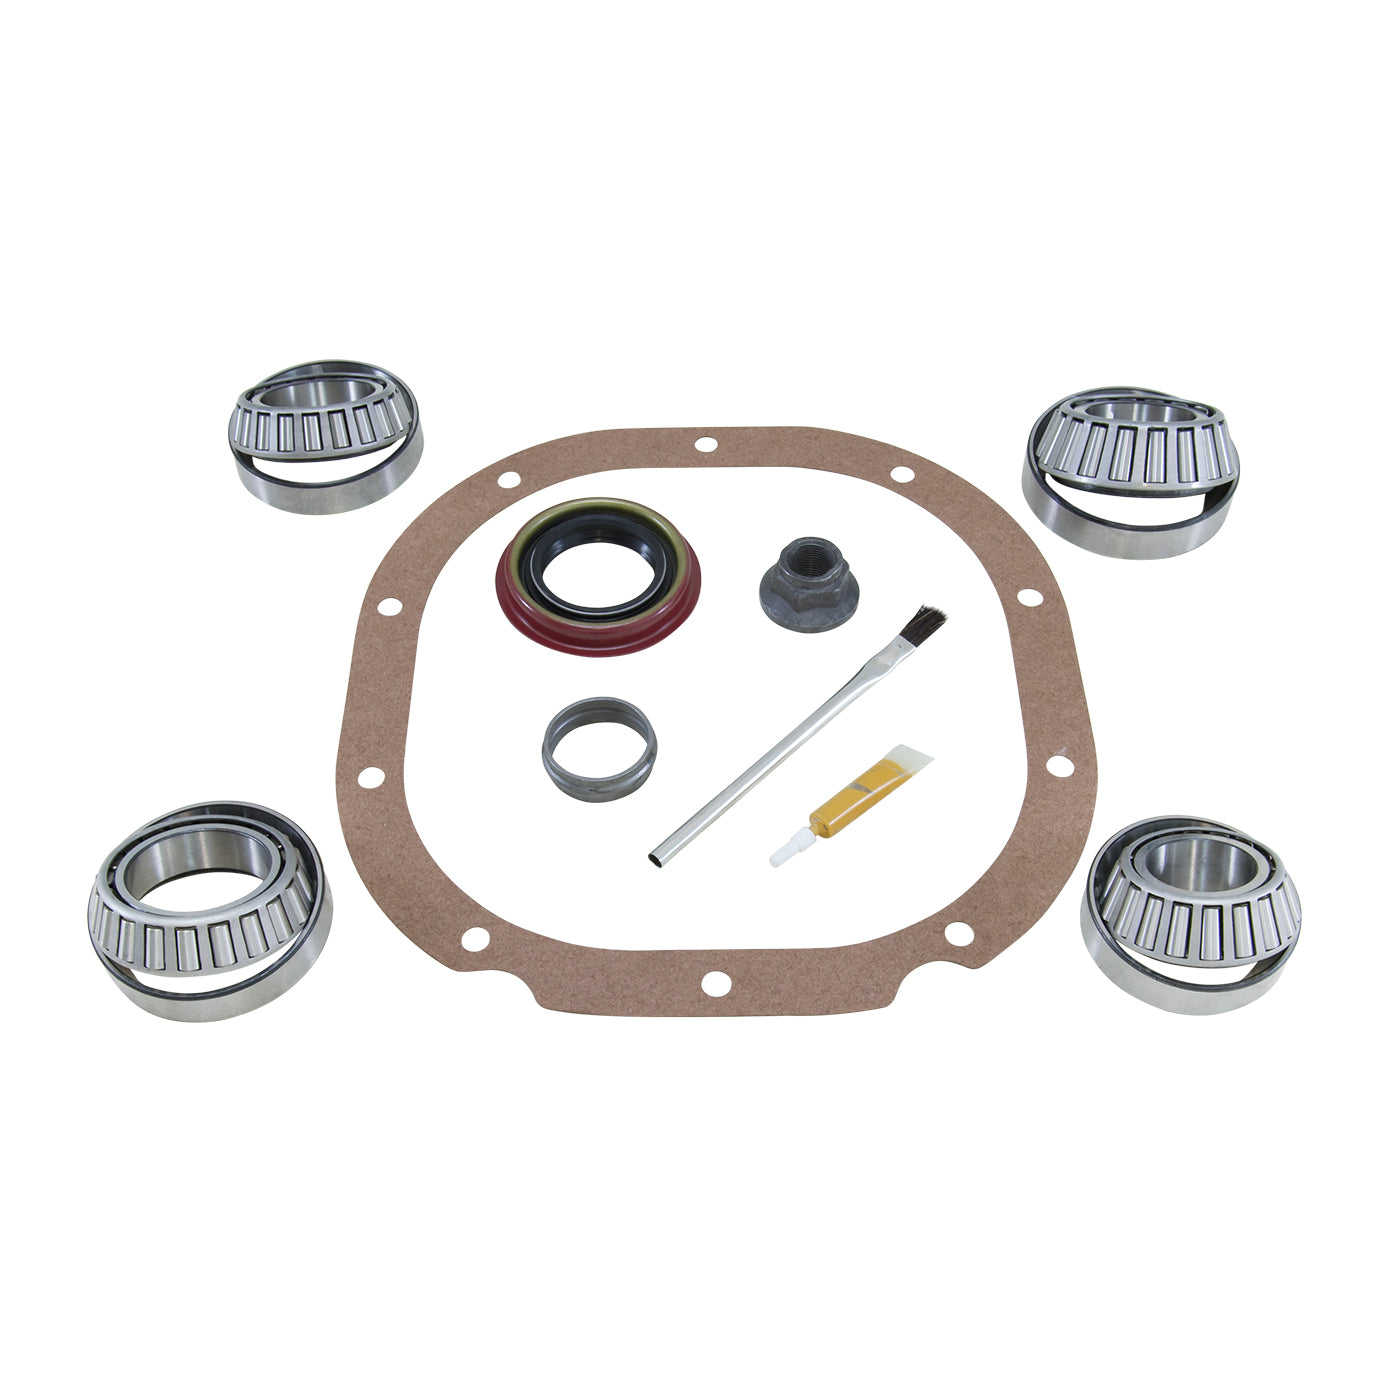 Yukon Gear Bearing install kit for Ford 7.5" differential BK F7.5